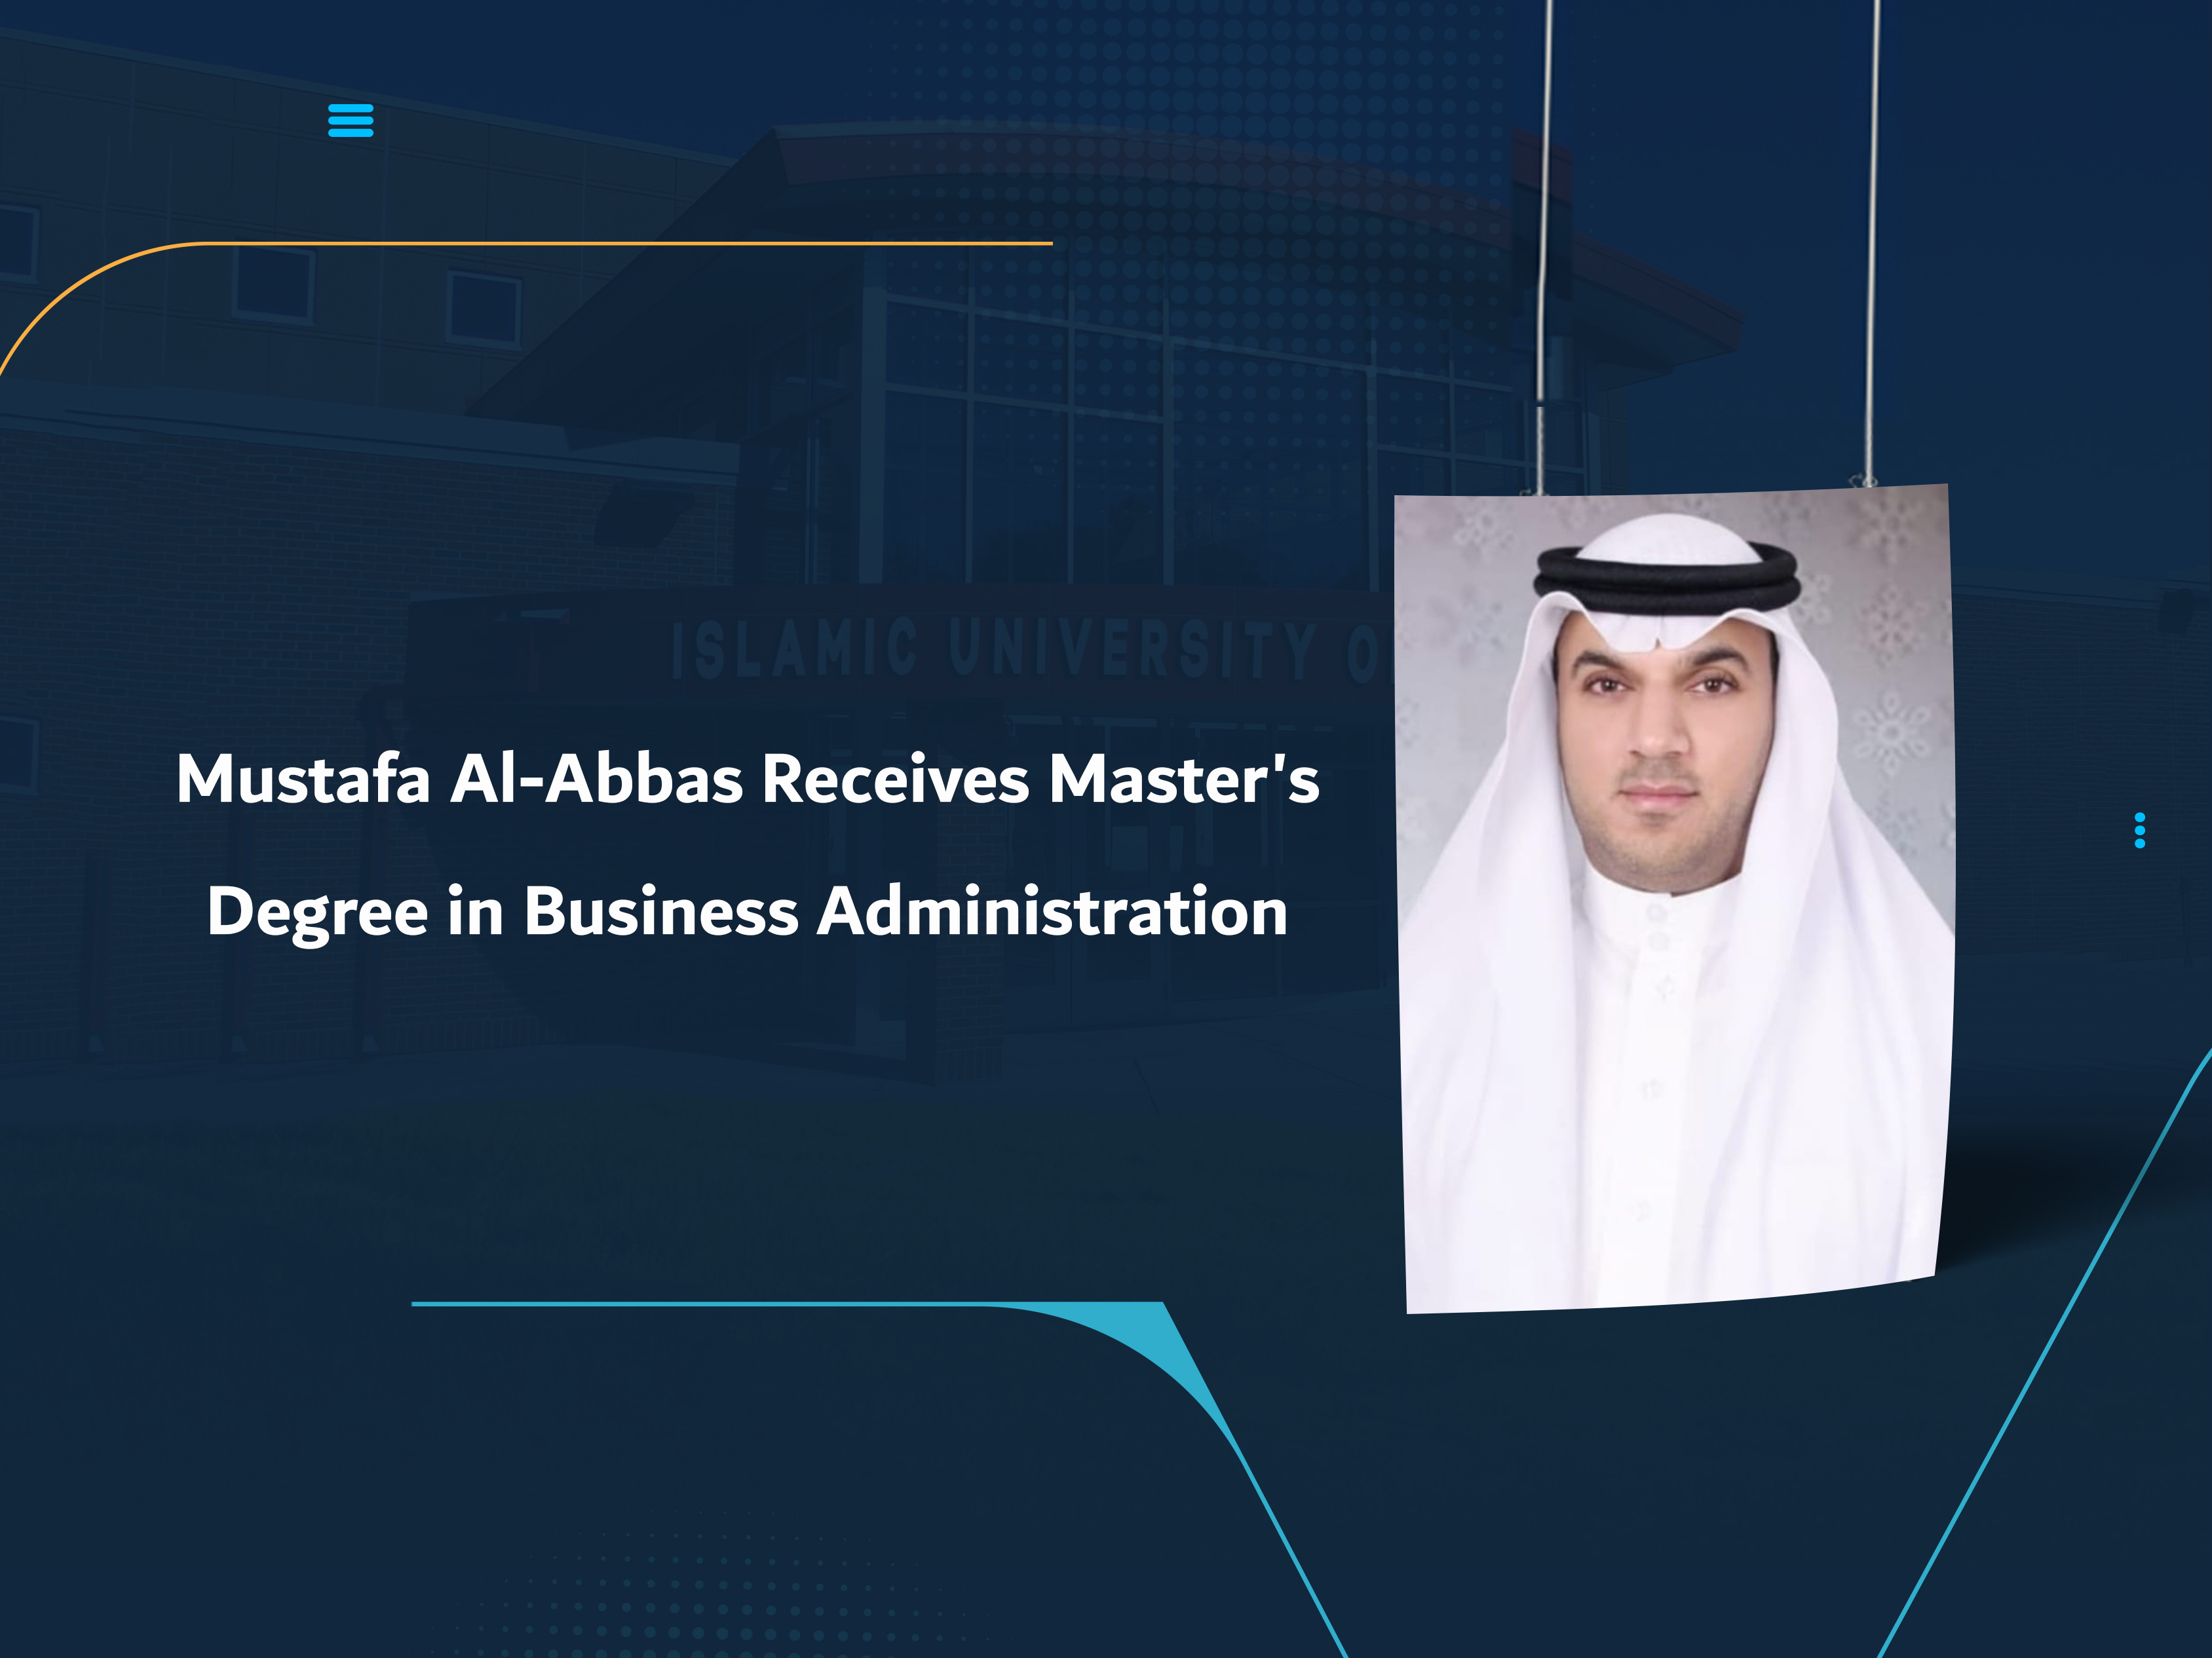 Mustafa Al-Abbas Receives Master's Degree in Business Administration